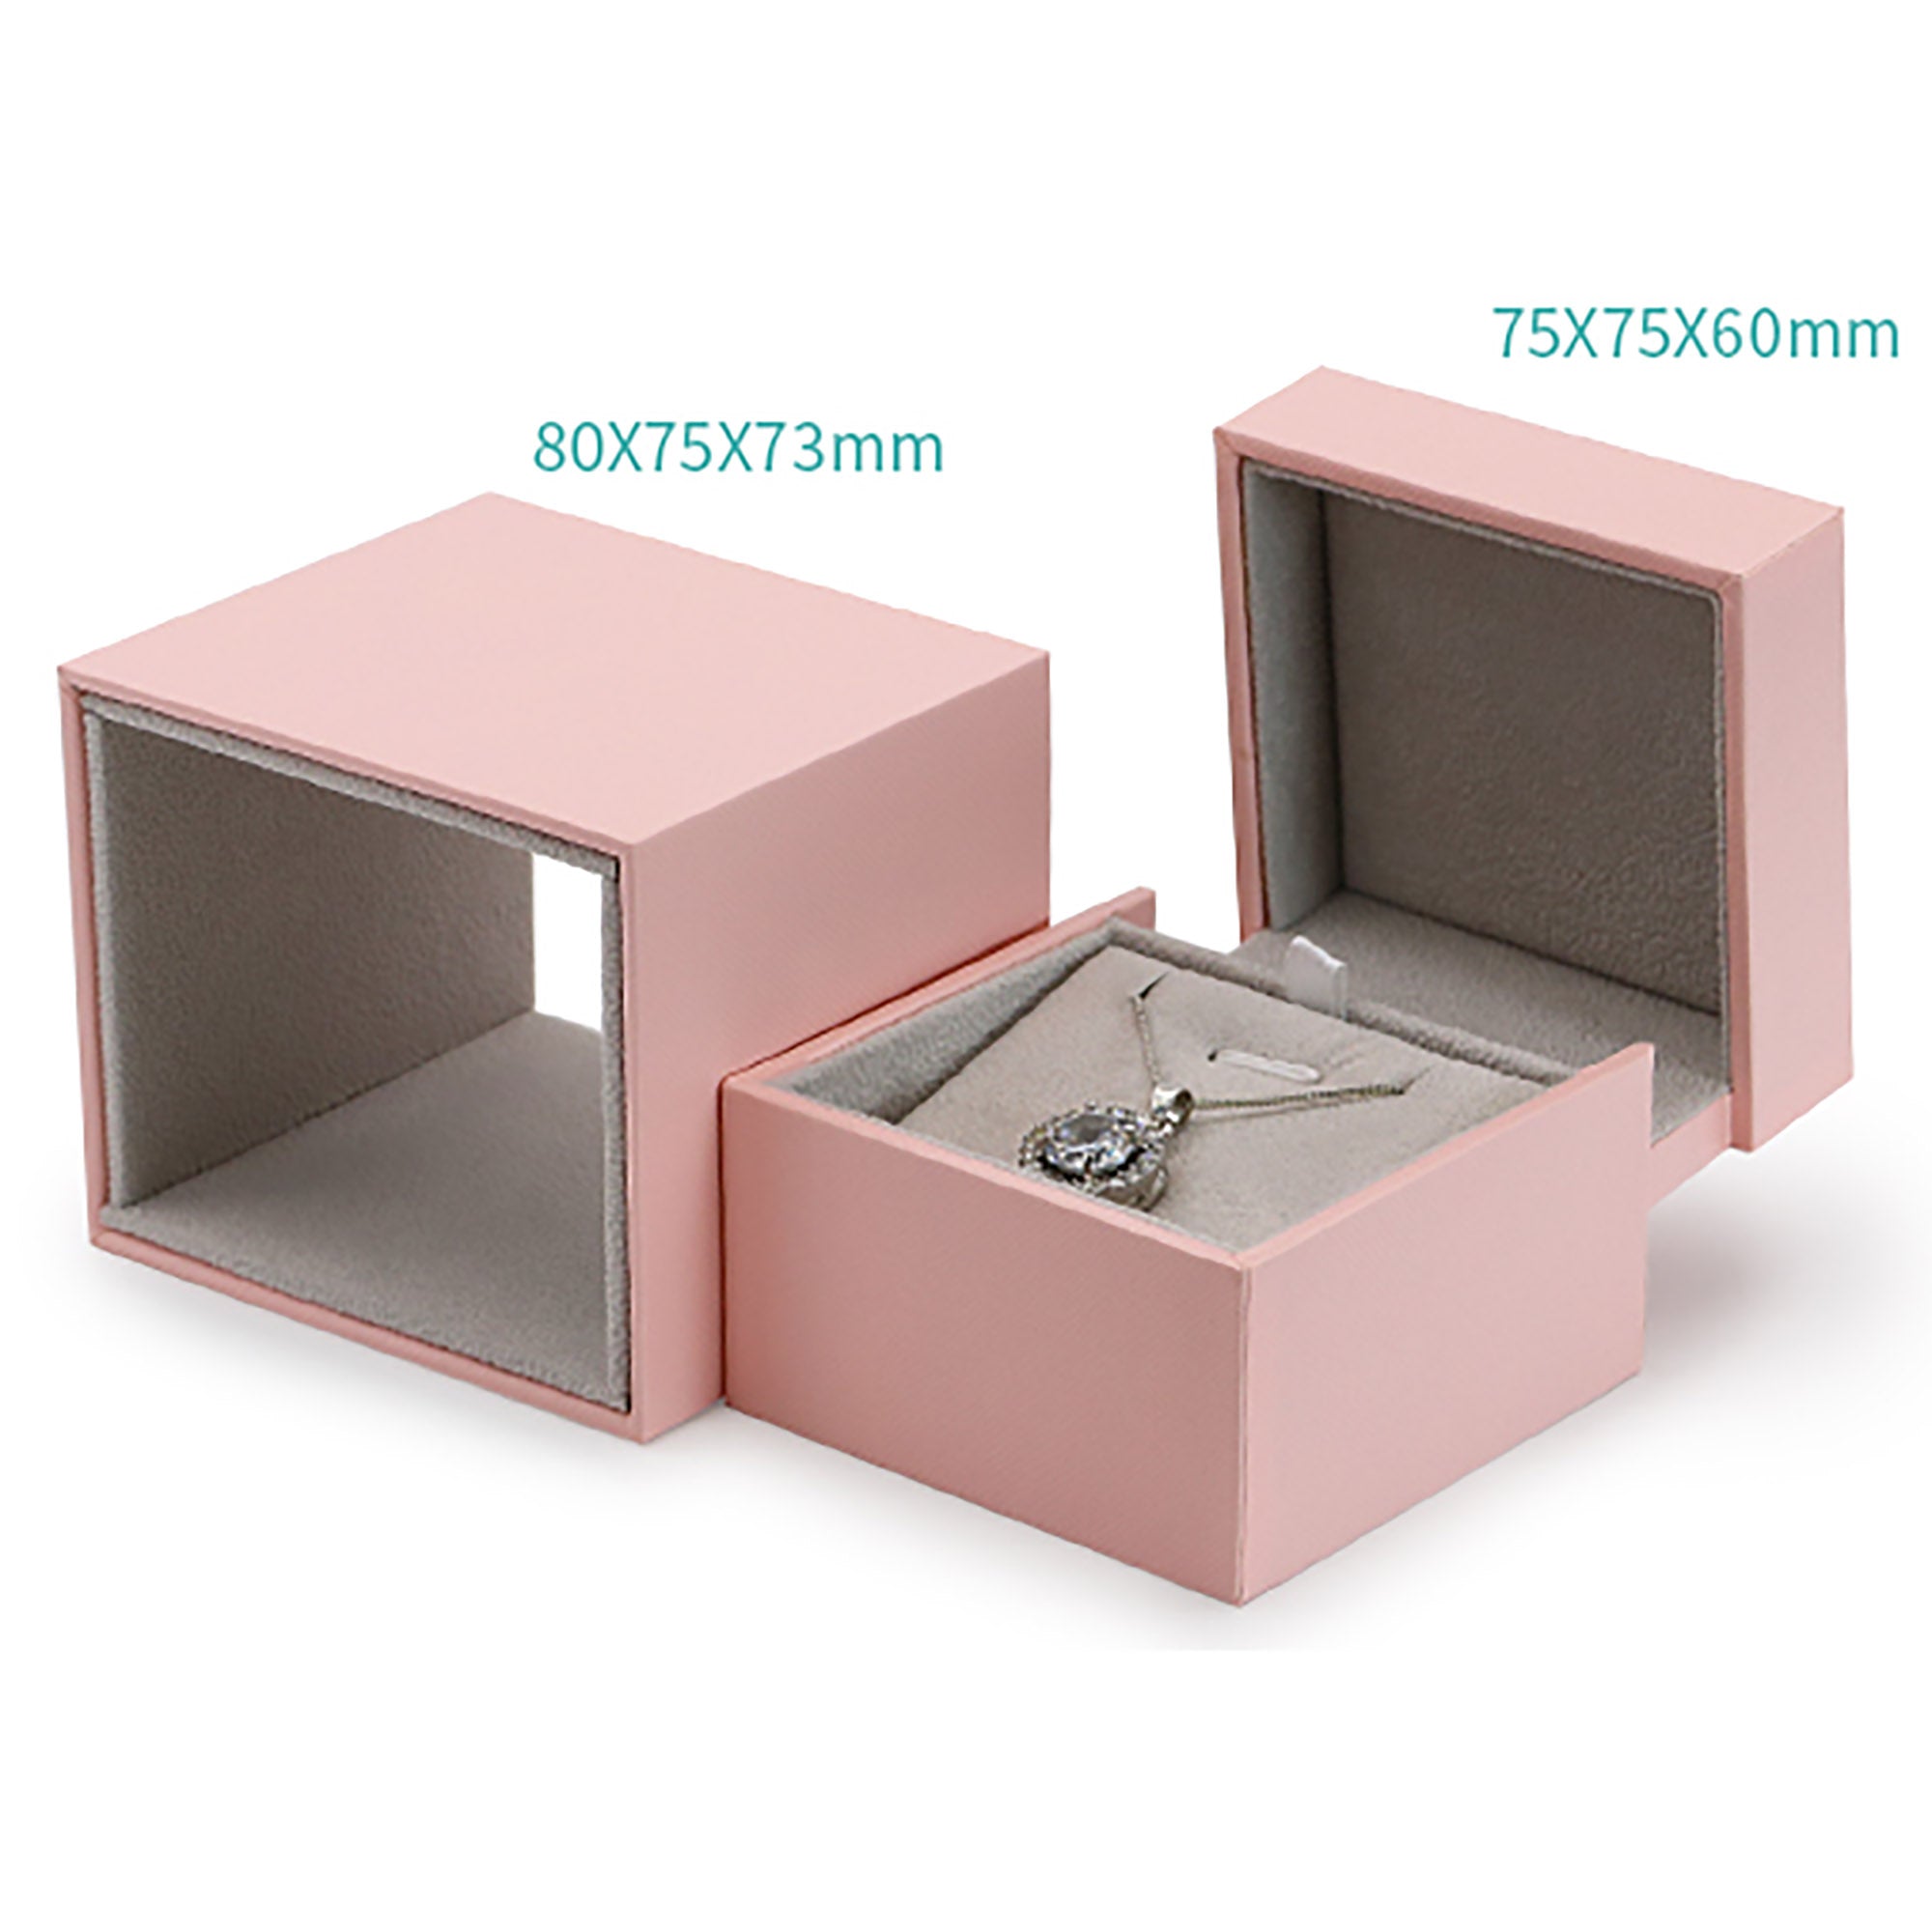 Copy of Pink Jewelry Box / Gift Box Vintage Gift Home Deco Decoration Design